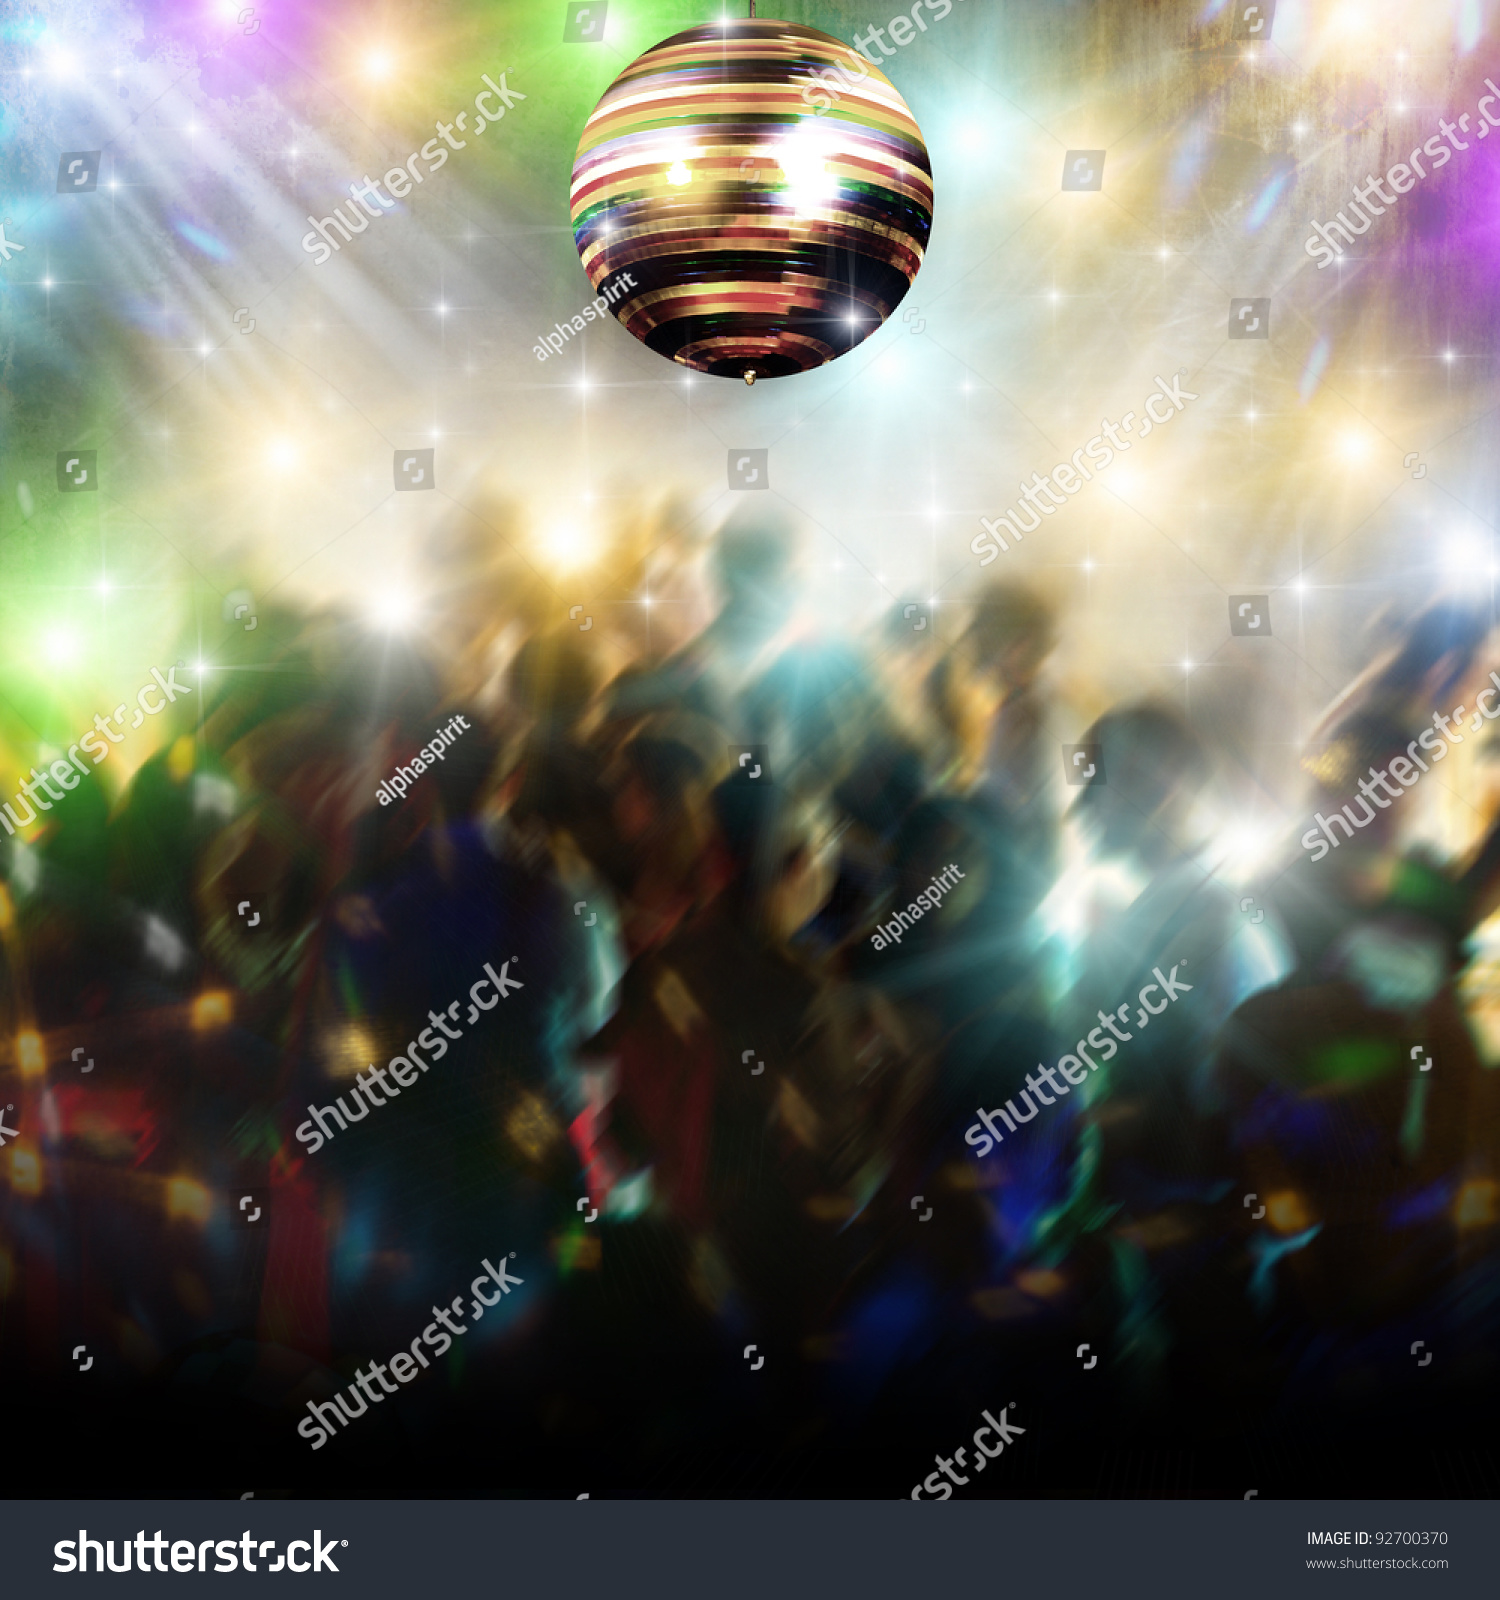 Discotheque Disco Ball People Stock Photo 92700370 - Shutterstock